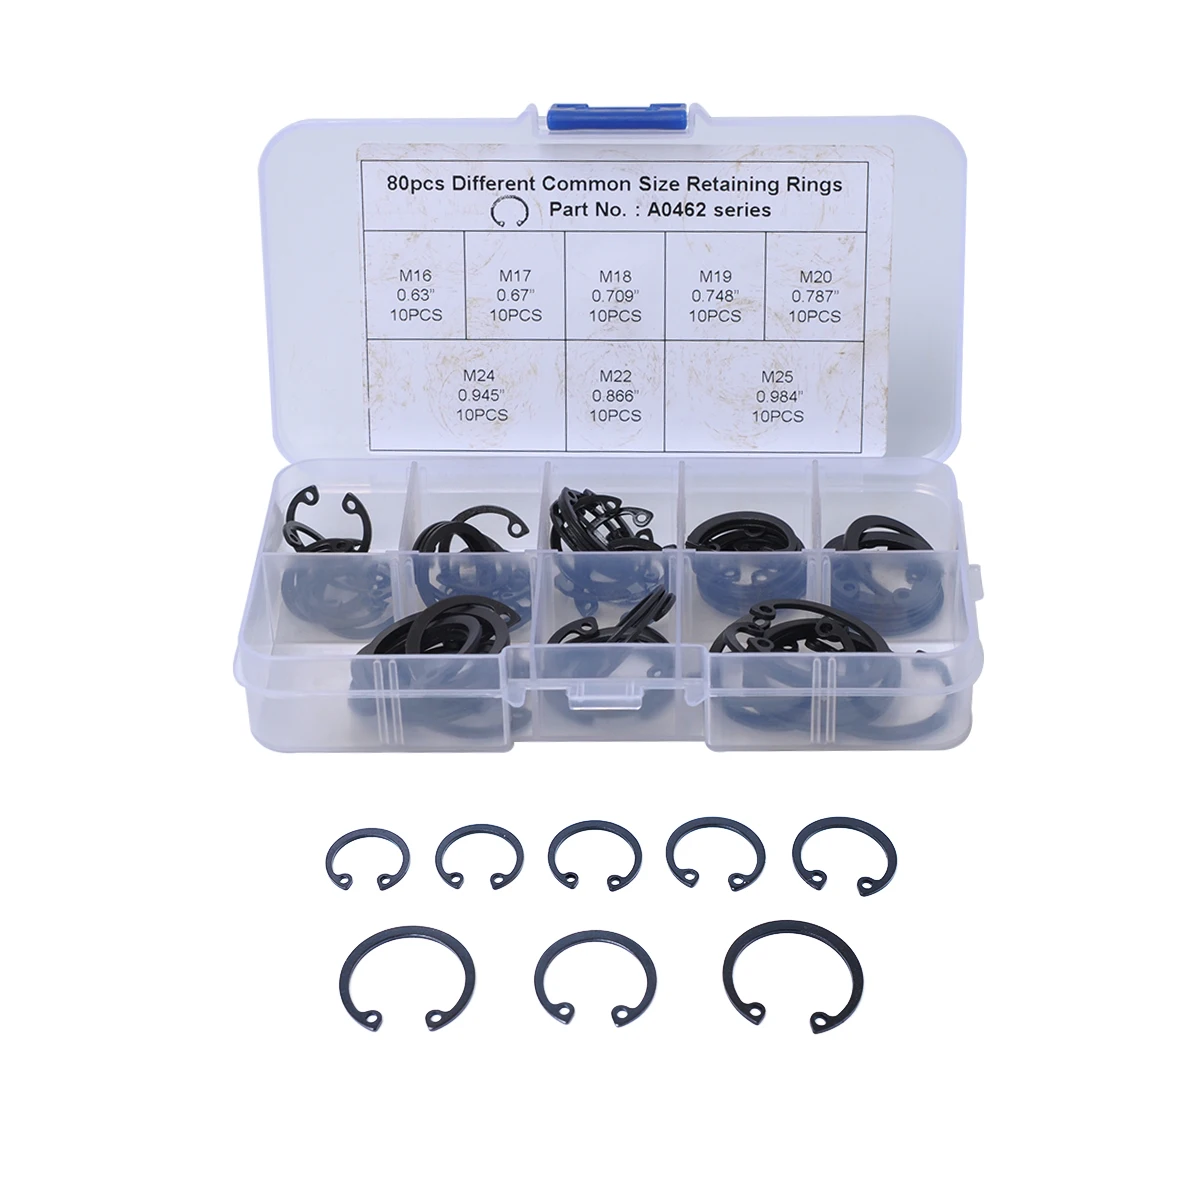 

New Good Quality 80-PC Circlip Car Snap Ring Assortment 8 Different Common Size Retaining Rings